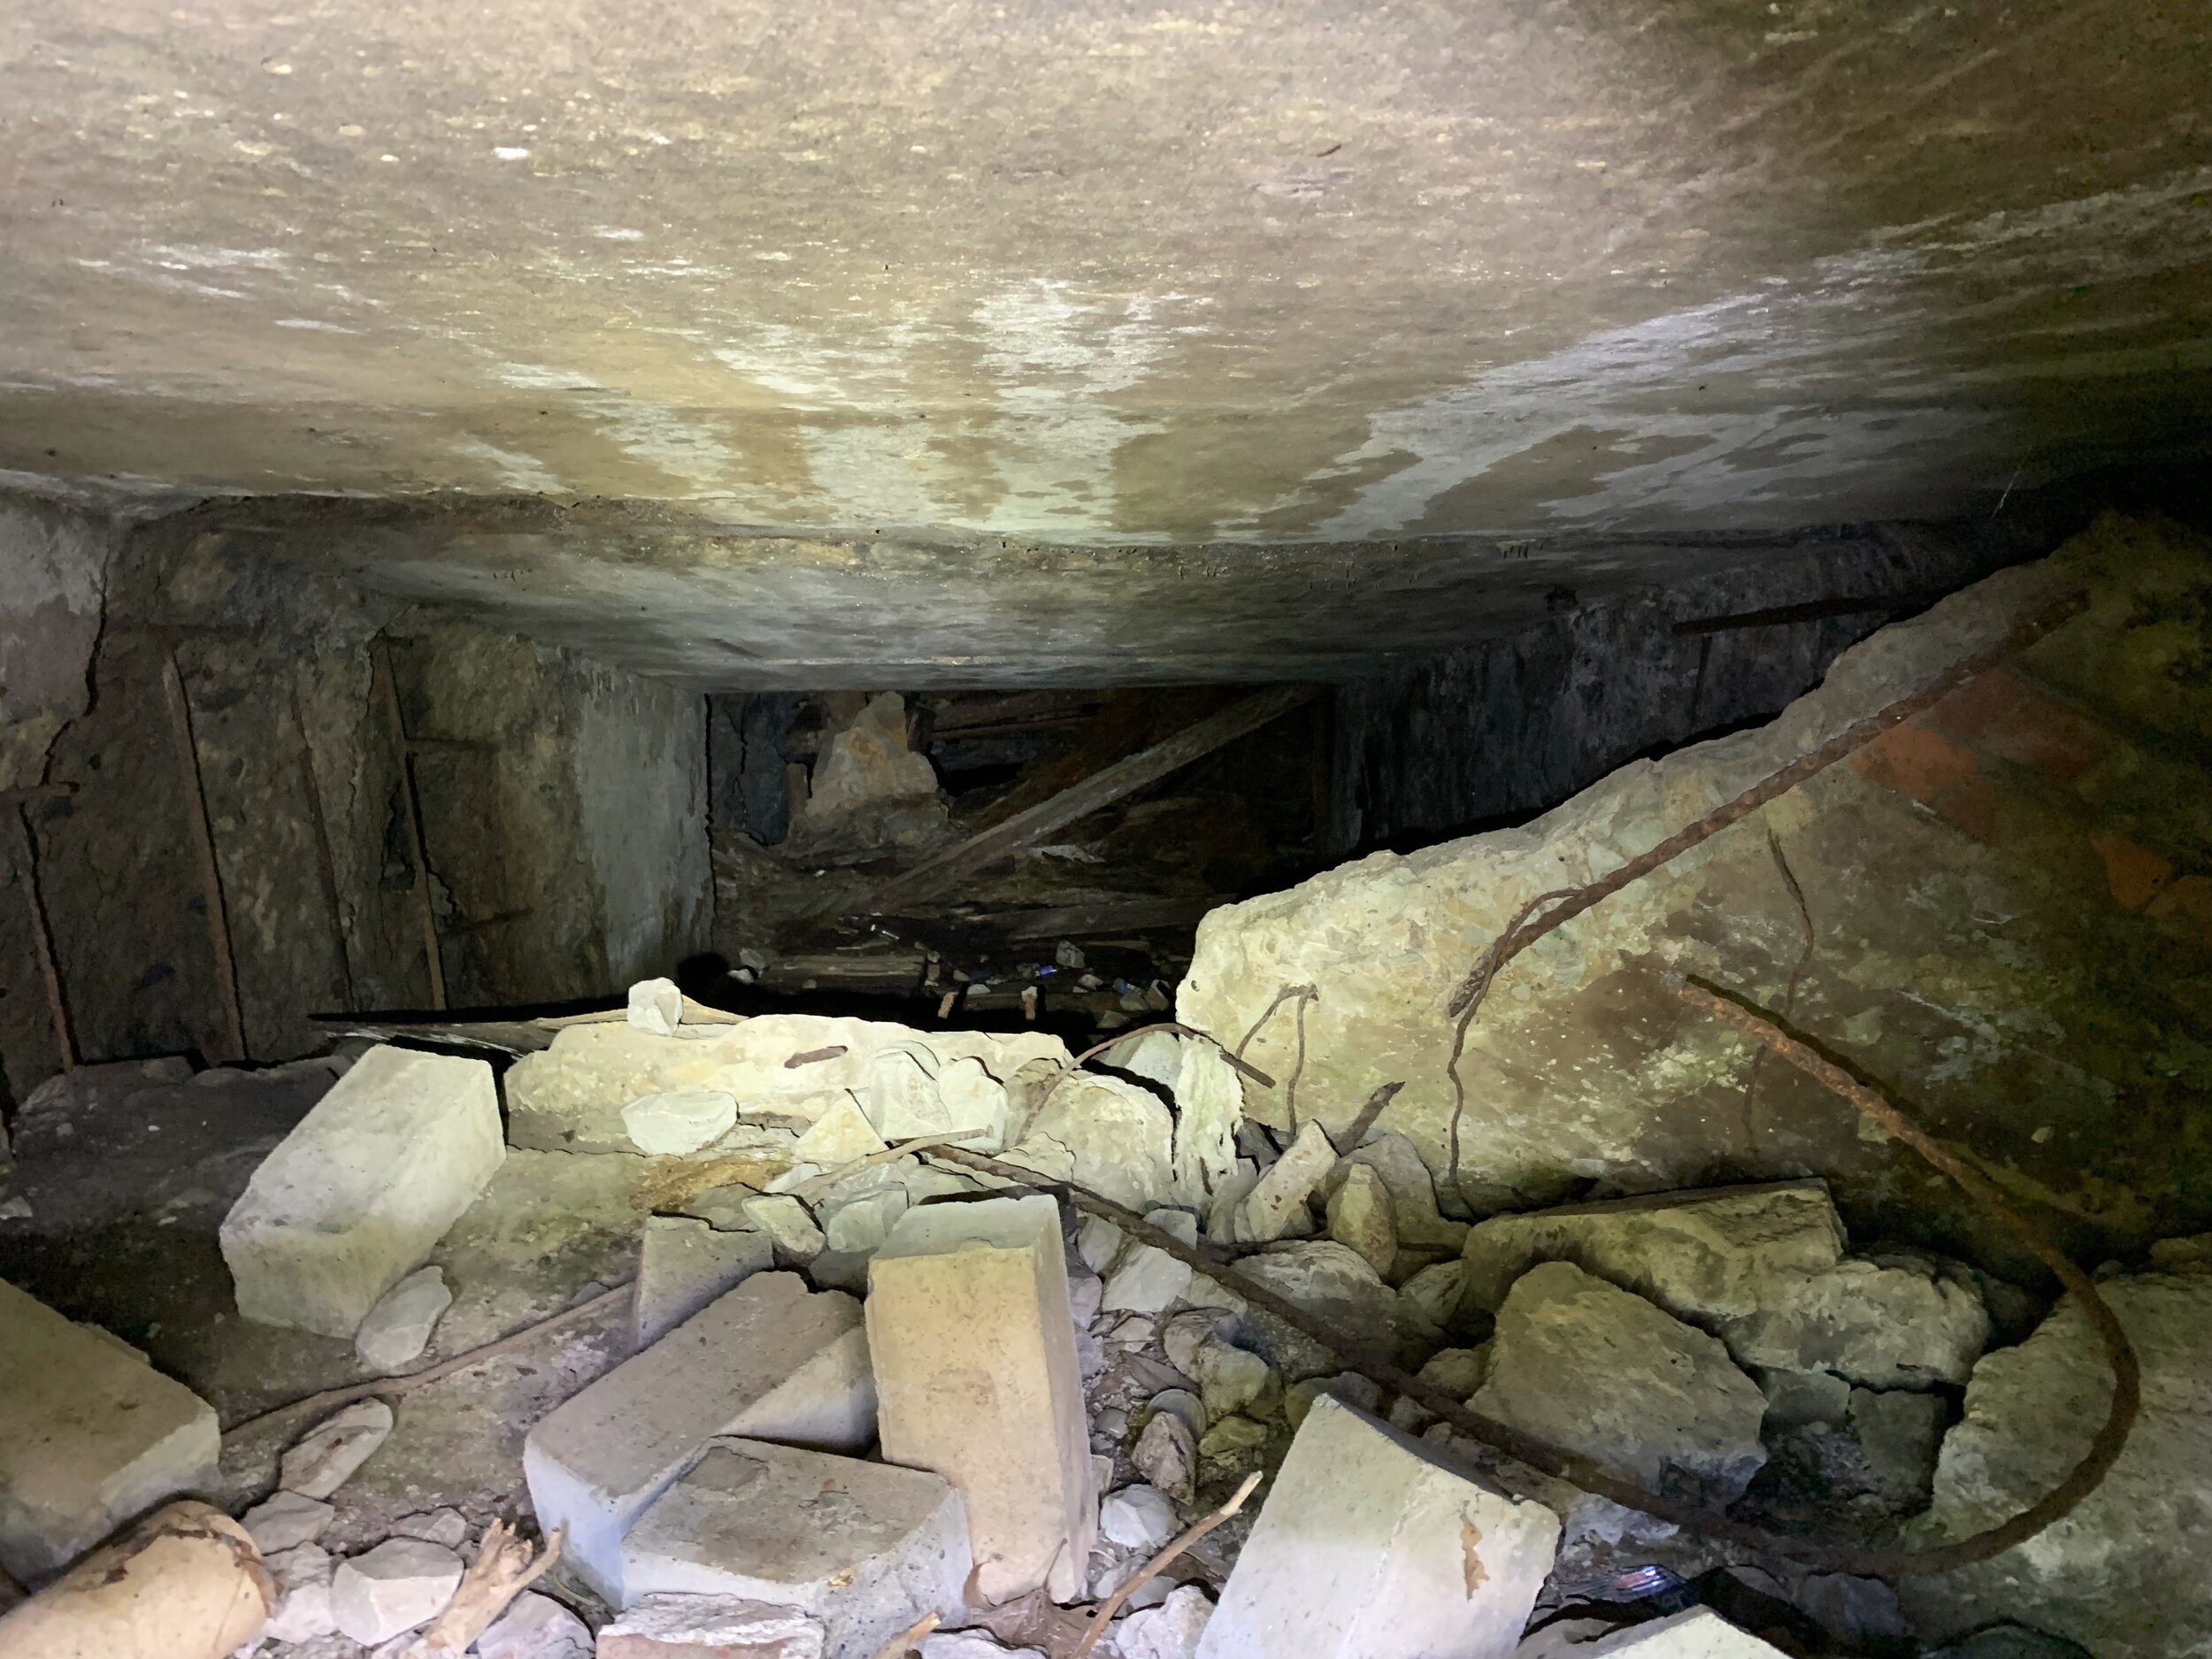 Looking into the Entrance to the Mine